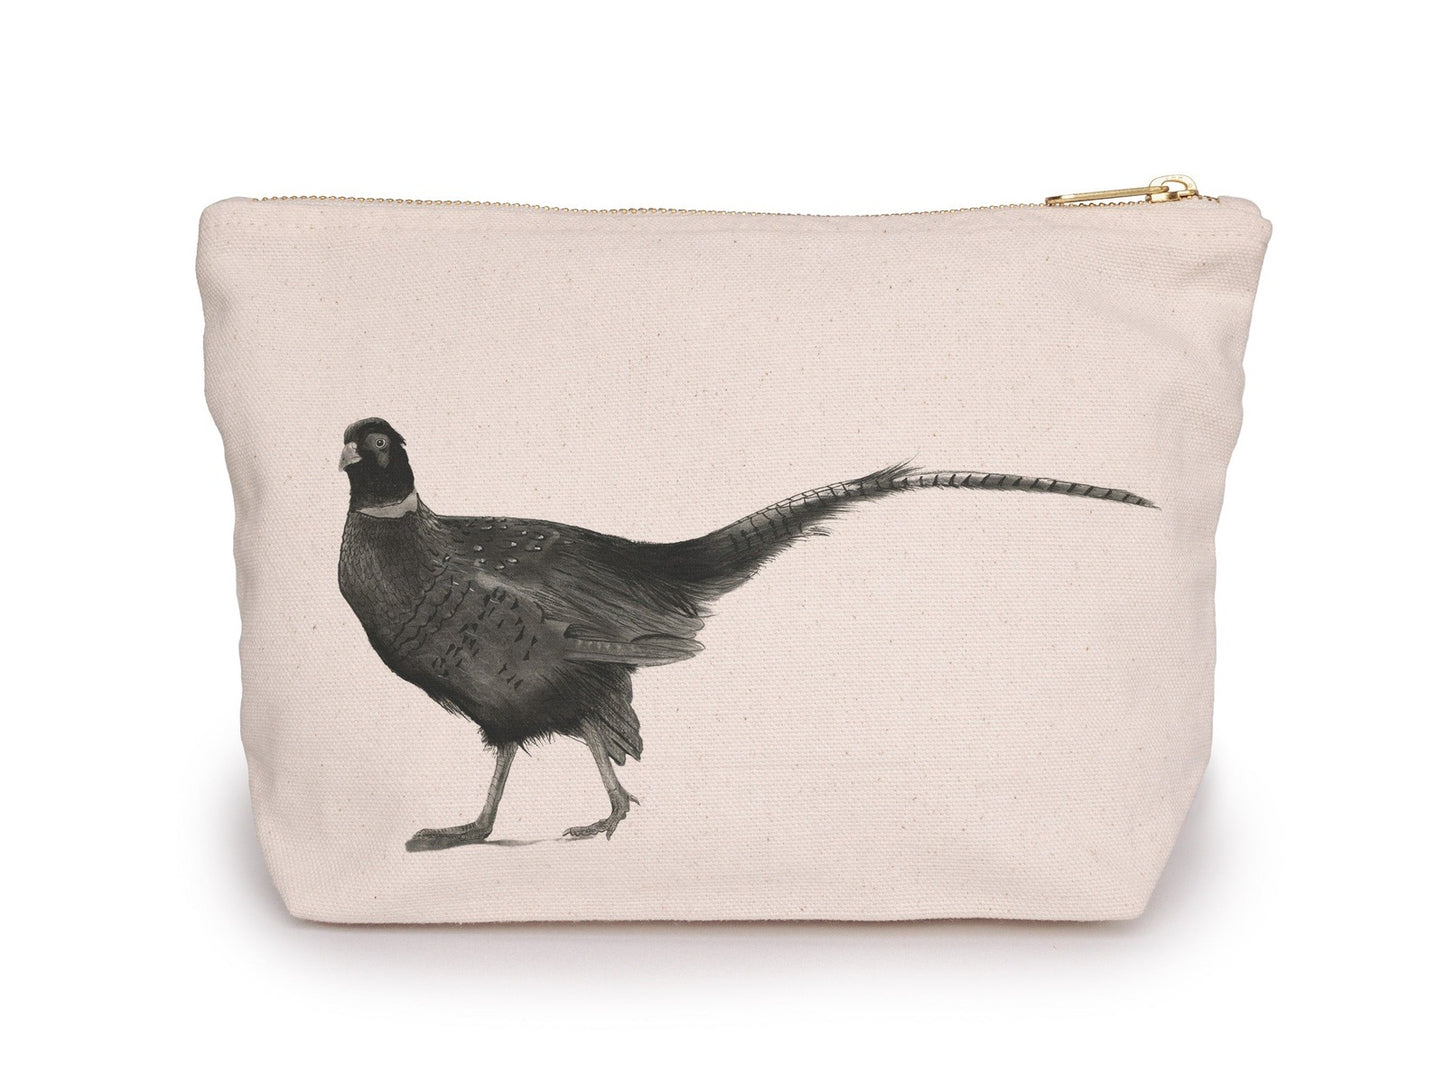 Pheasant Pouch Bag From Libra Fine Arts